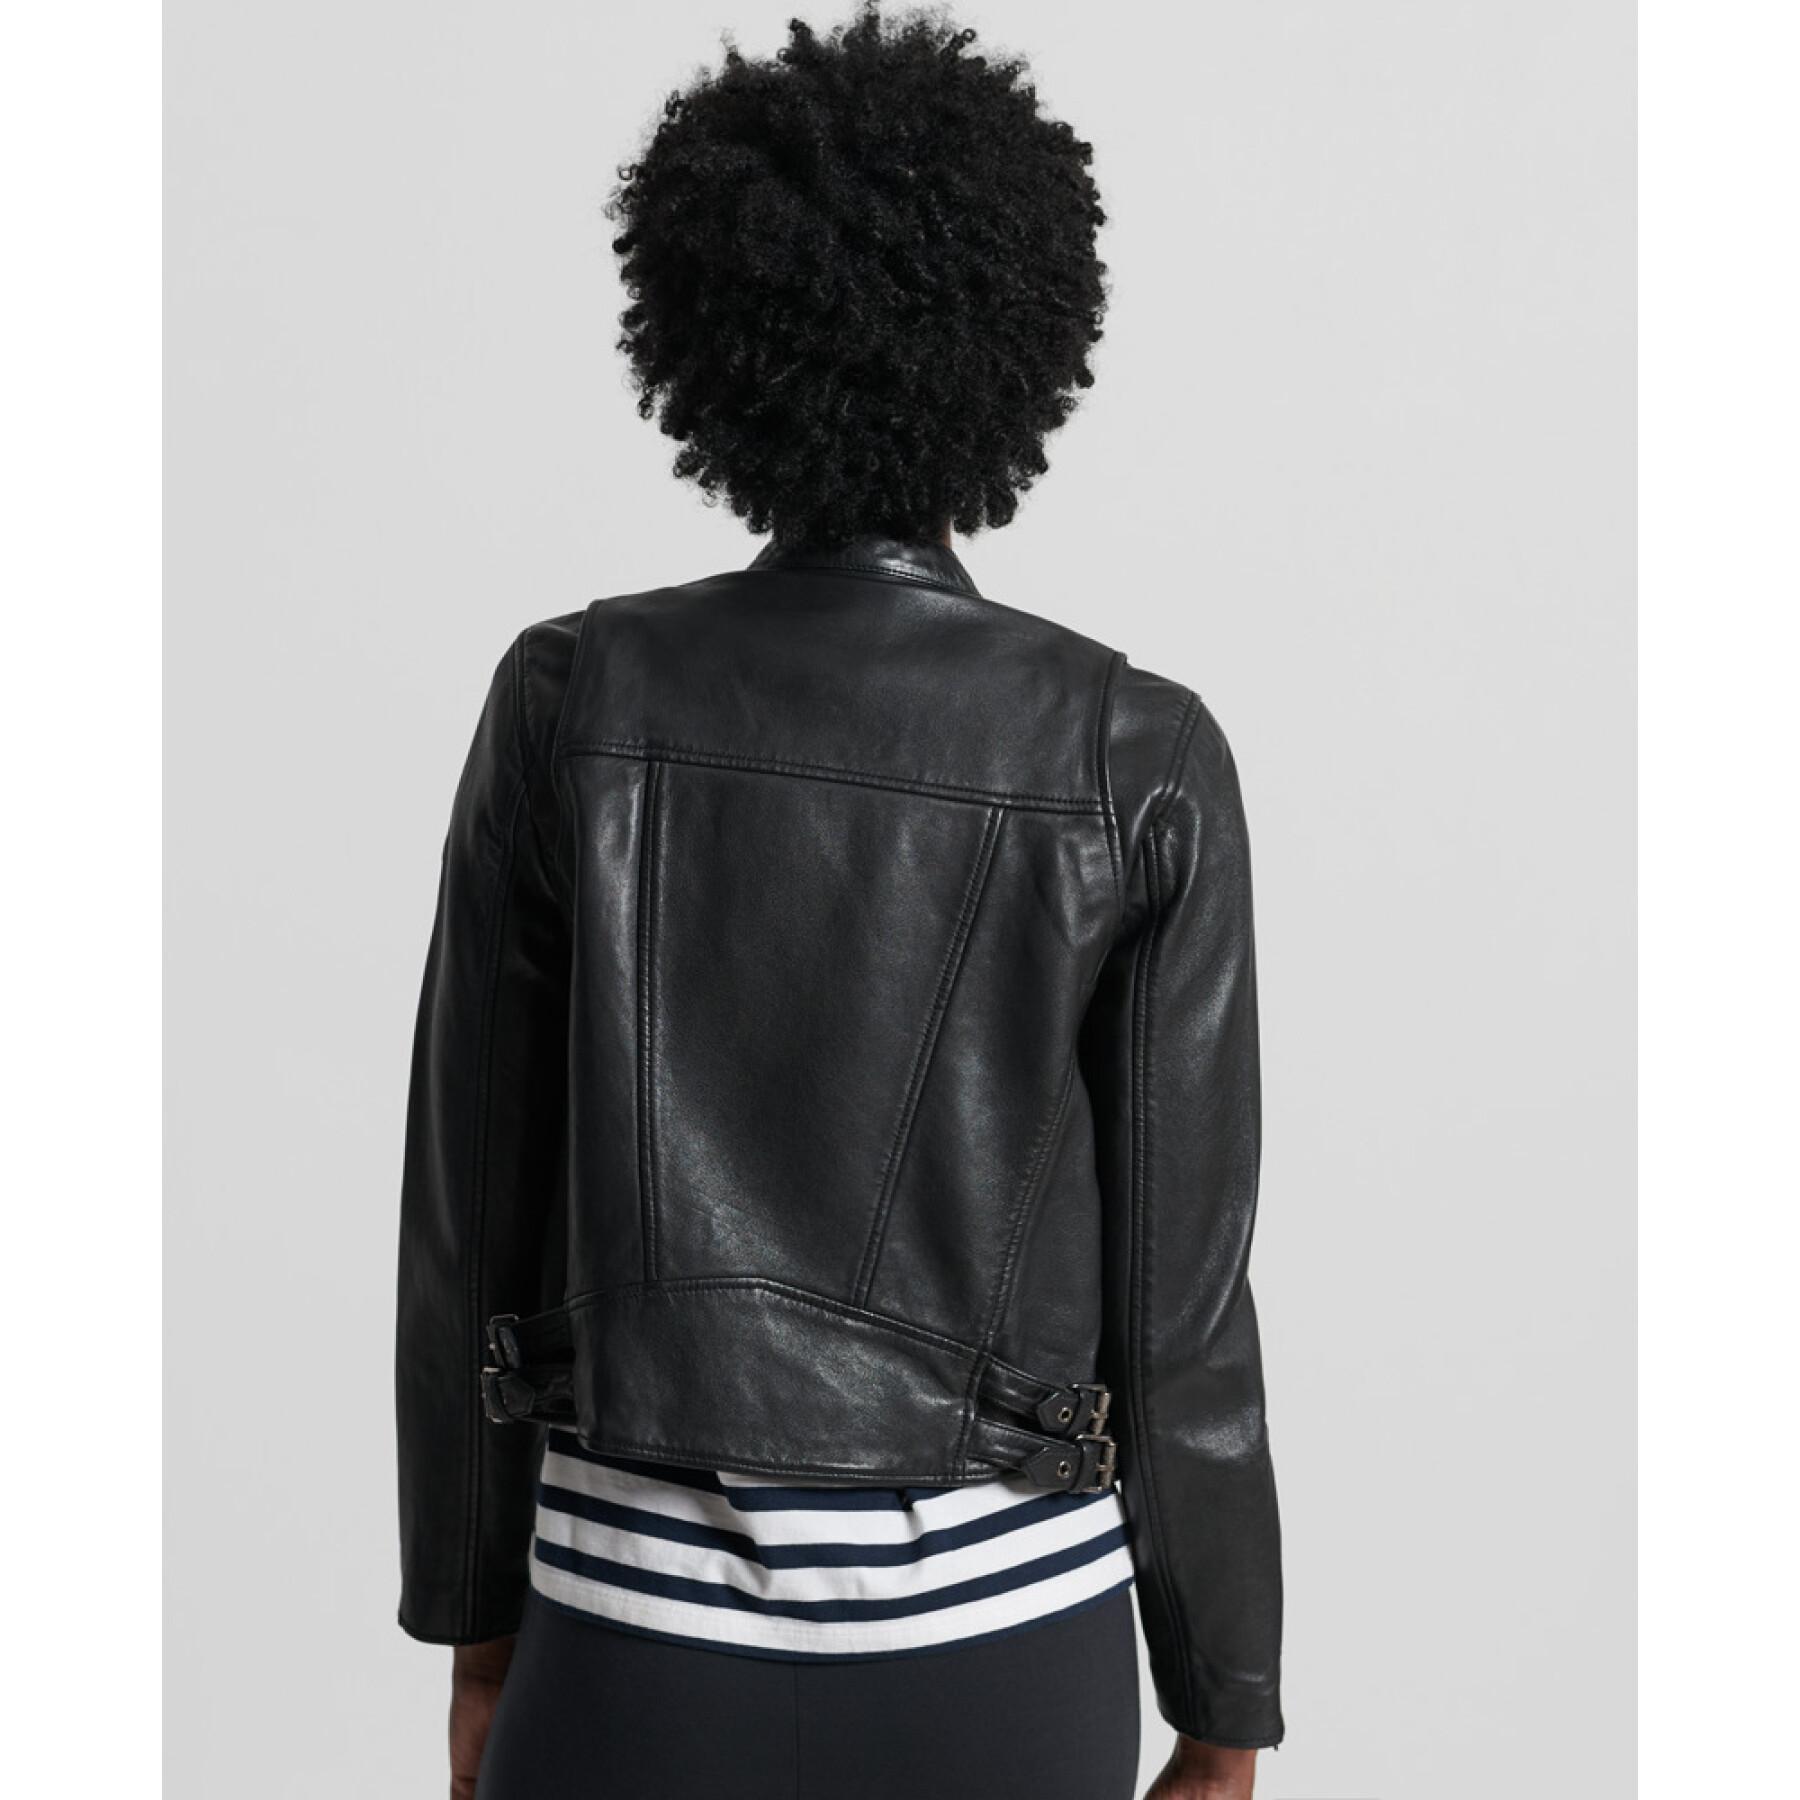 Leather jacket woman Superdry Racer